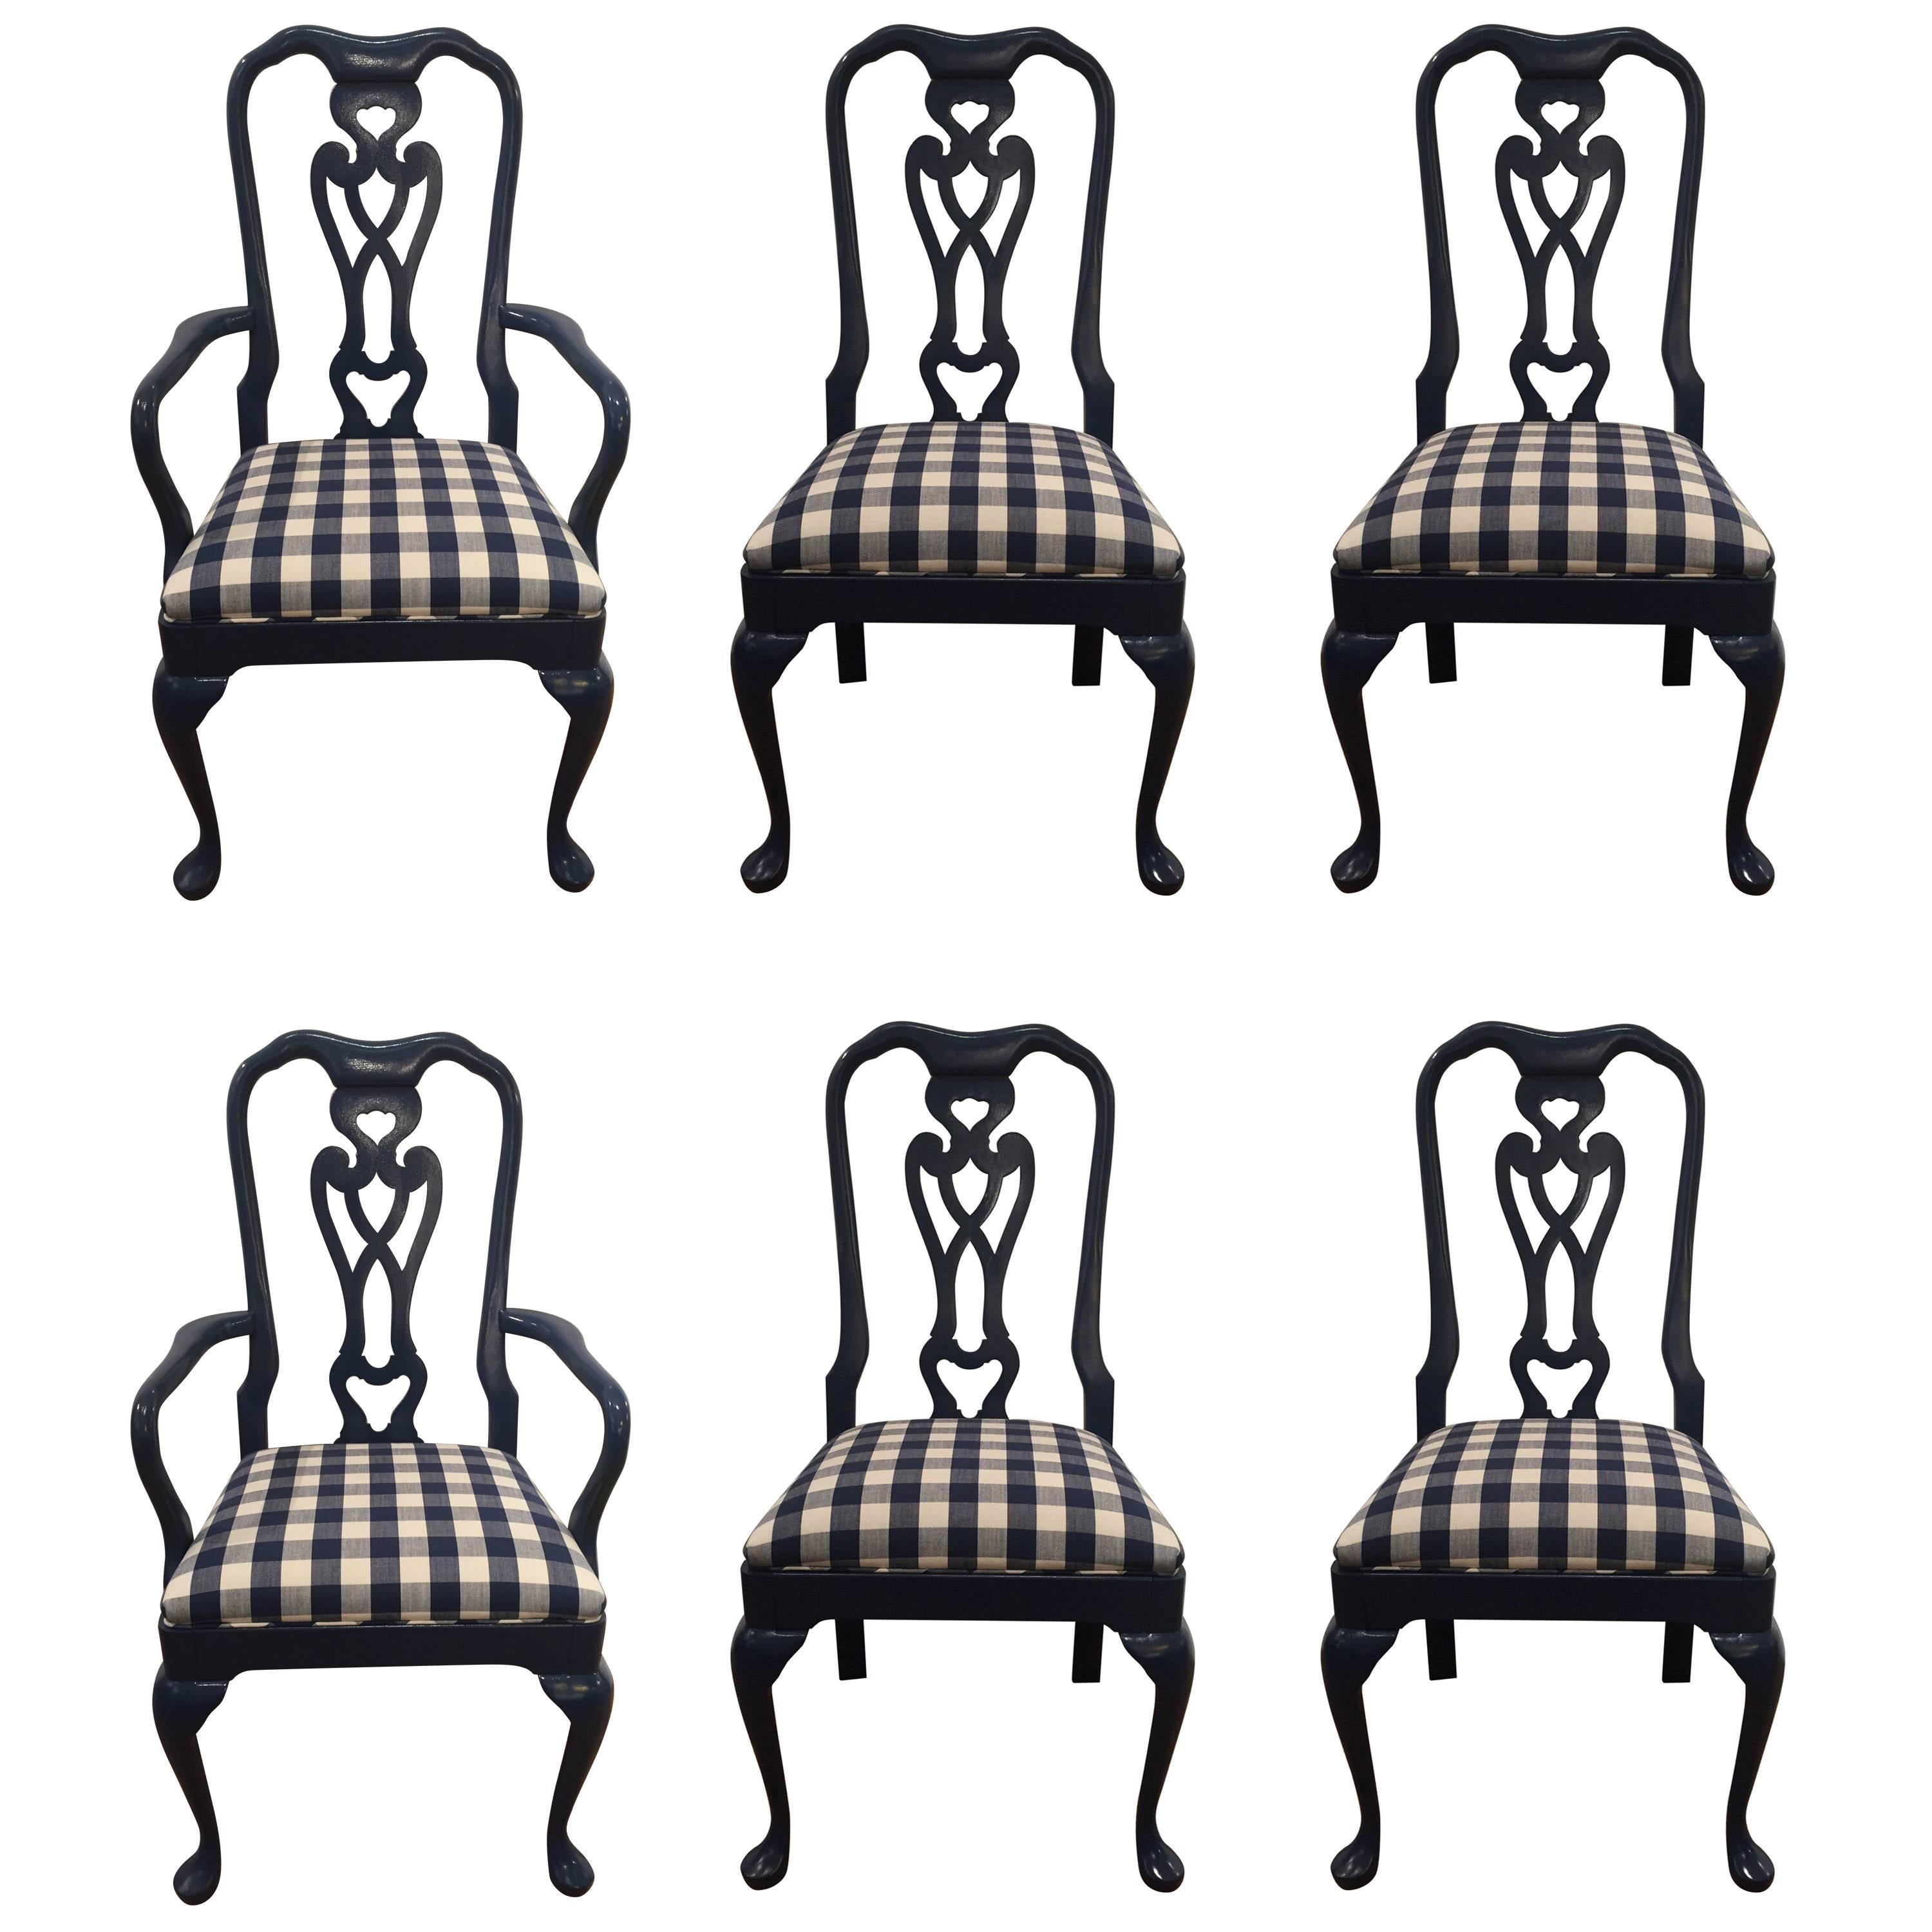 Sensational Set of Six Lacquered and Gingham Upholstered Dining Chairs